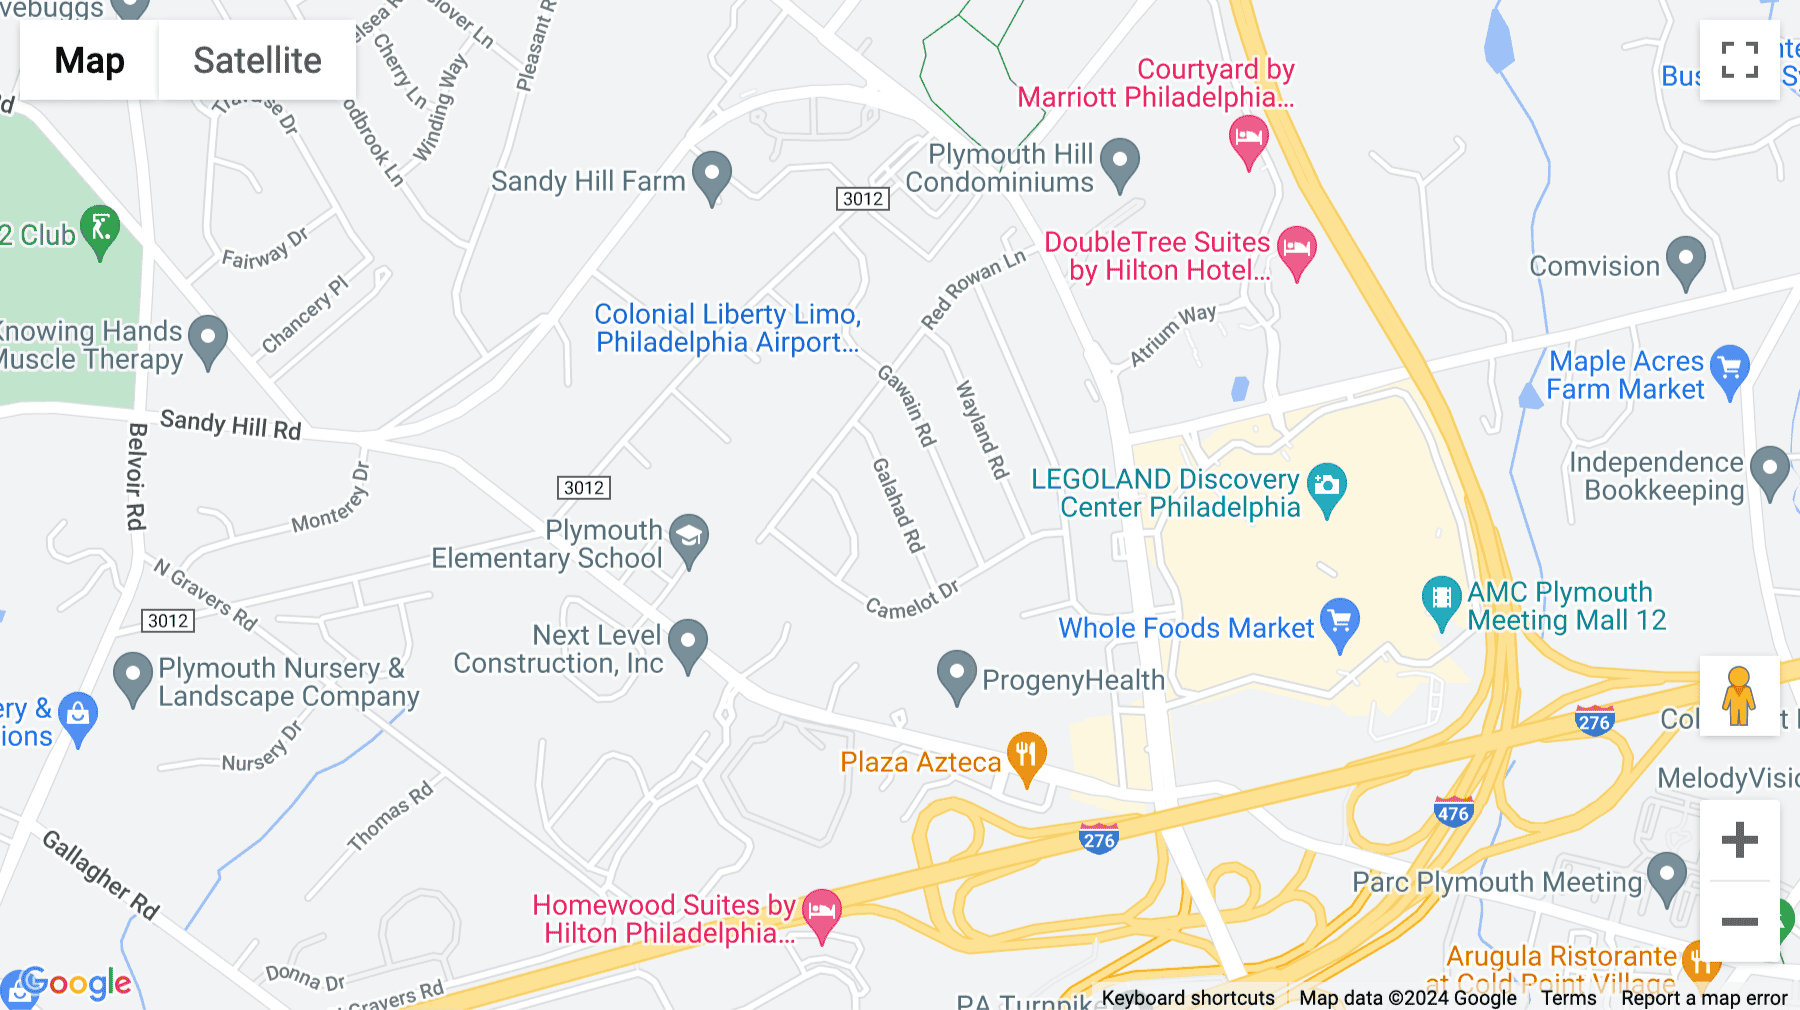 Click for interative map of 600 West Germantown Pike, Plymouth Meeting Executive Campus, Suite 400, Plymouth Meeting